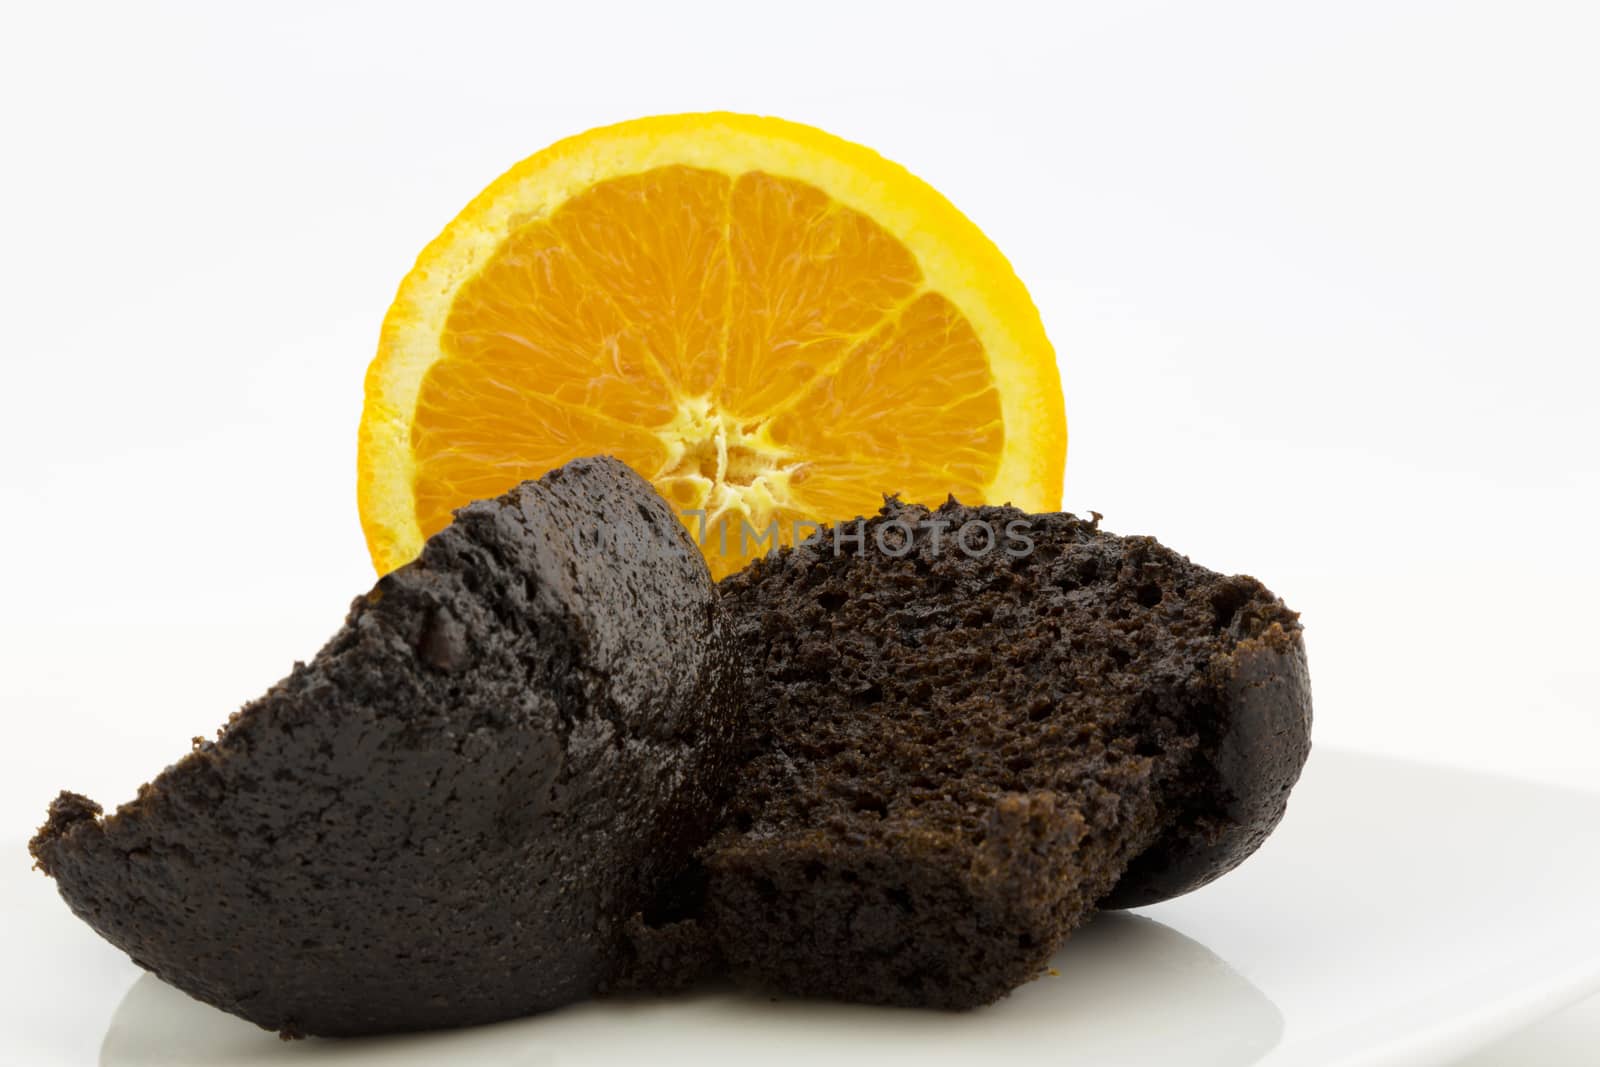 Sweet but healthy breakfast shown in fresh, hot chocolate muffin placed in front of sliced, juicy orange.  